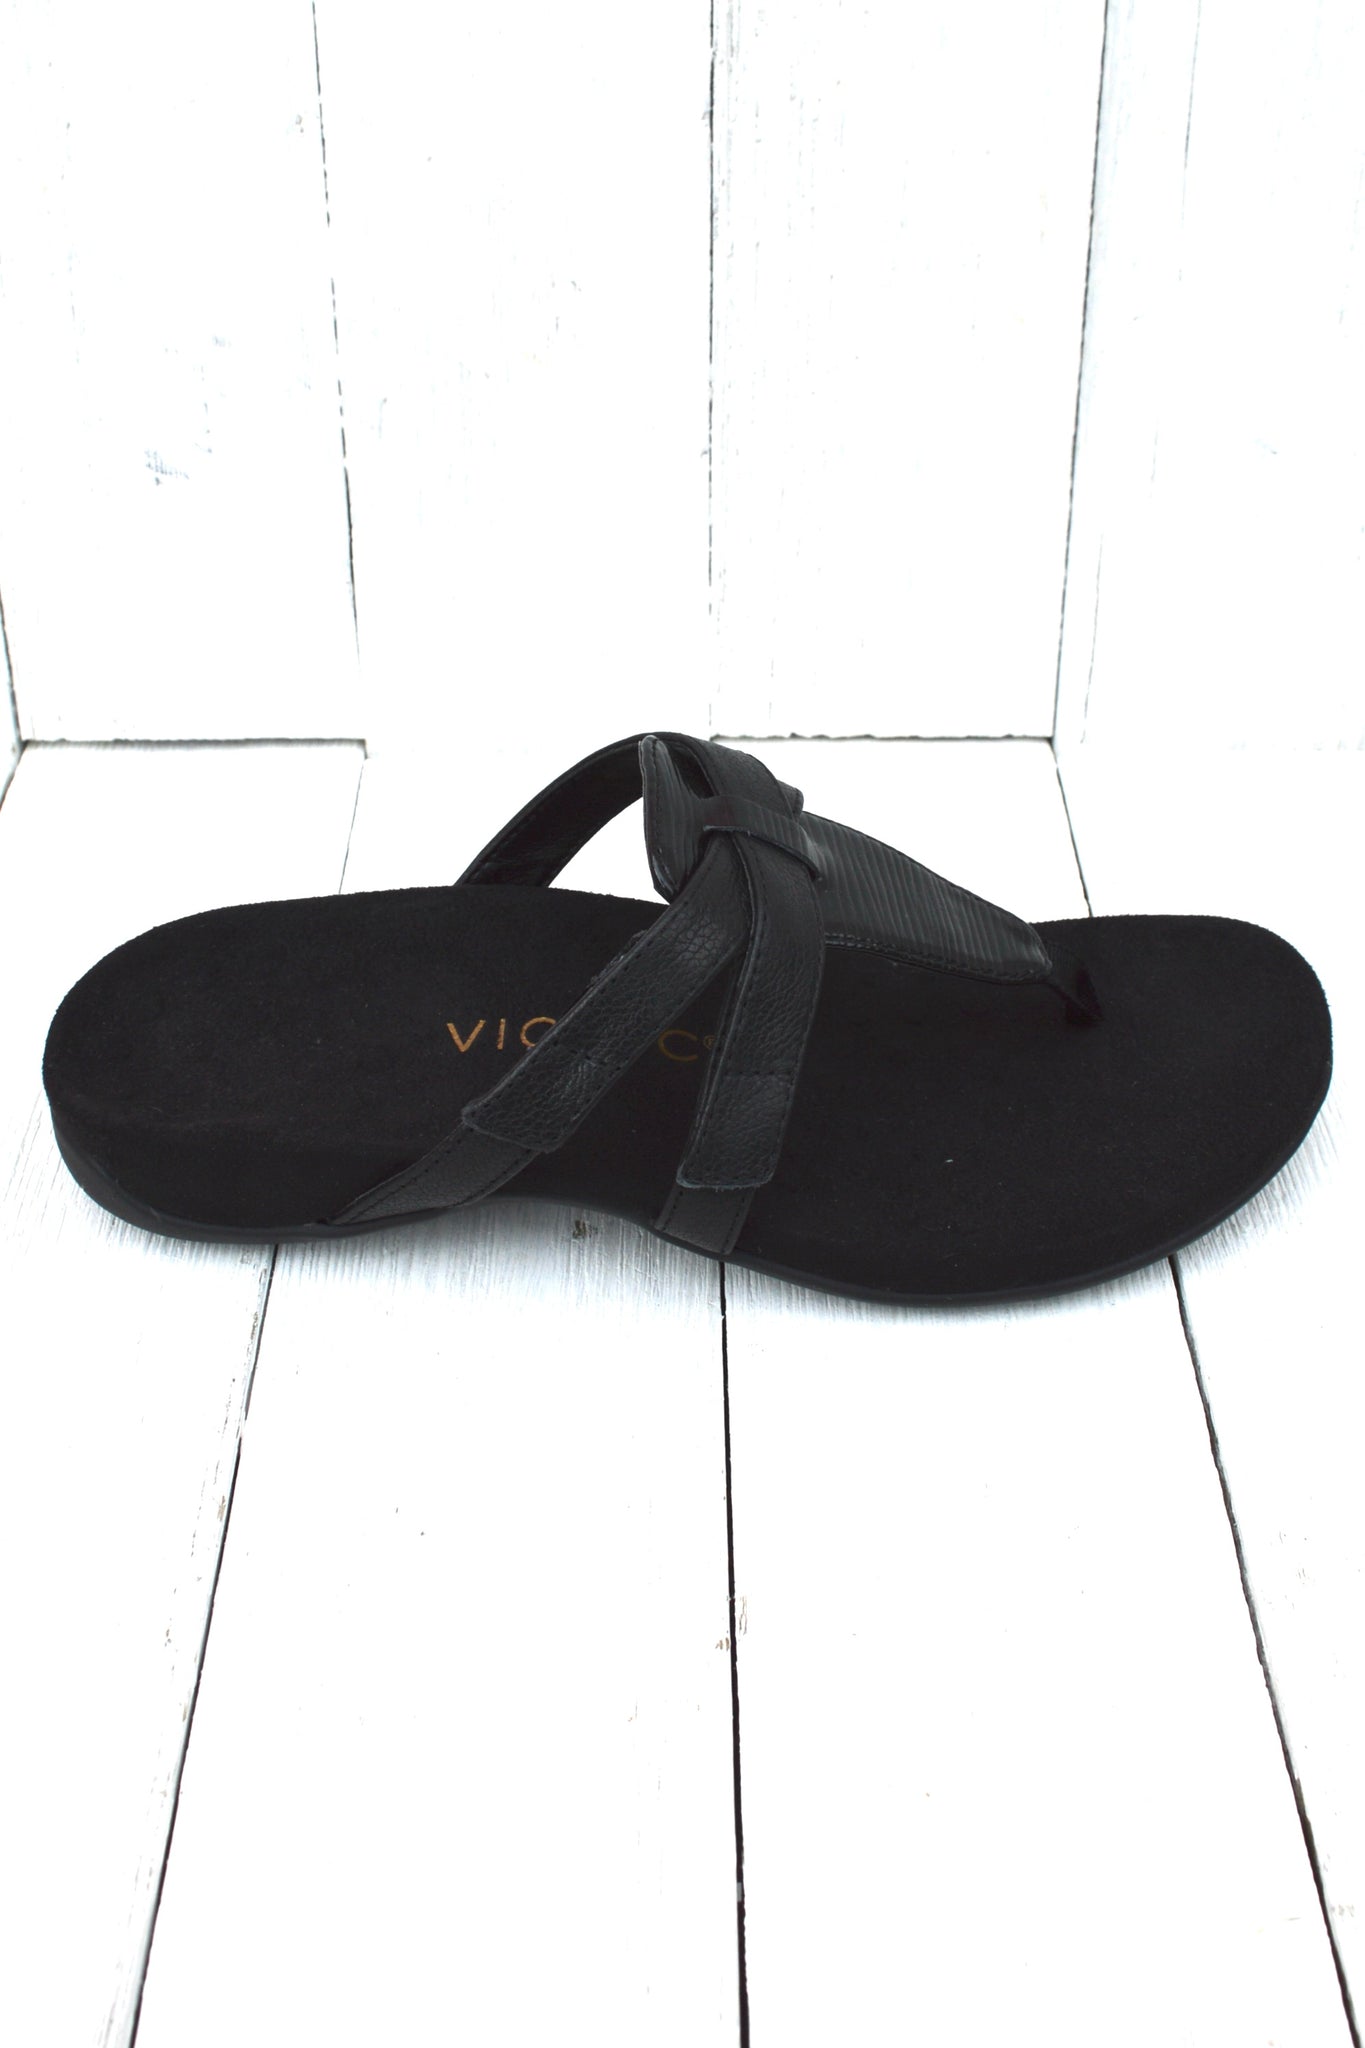 Vionic Karley Size 6 only